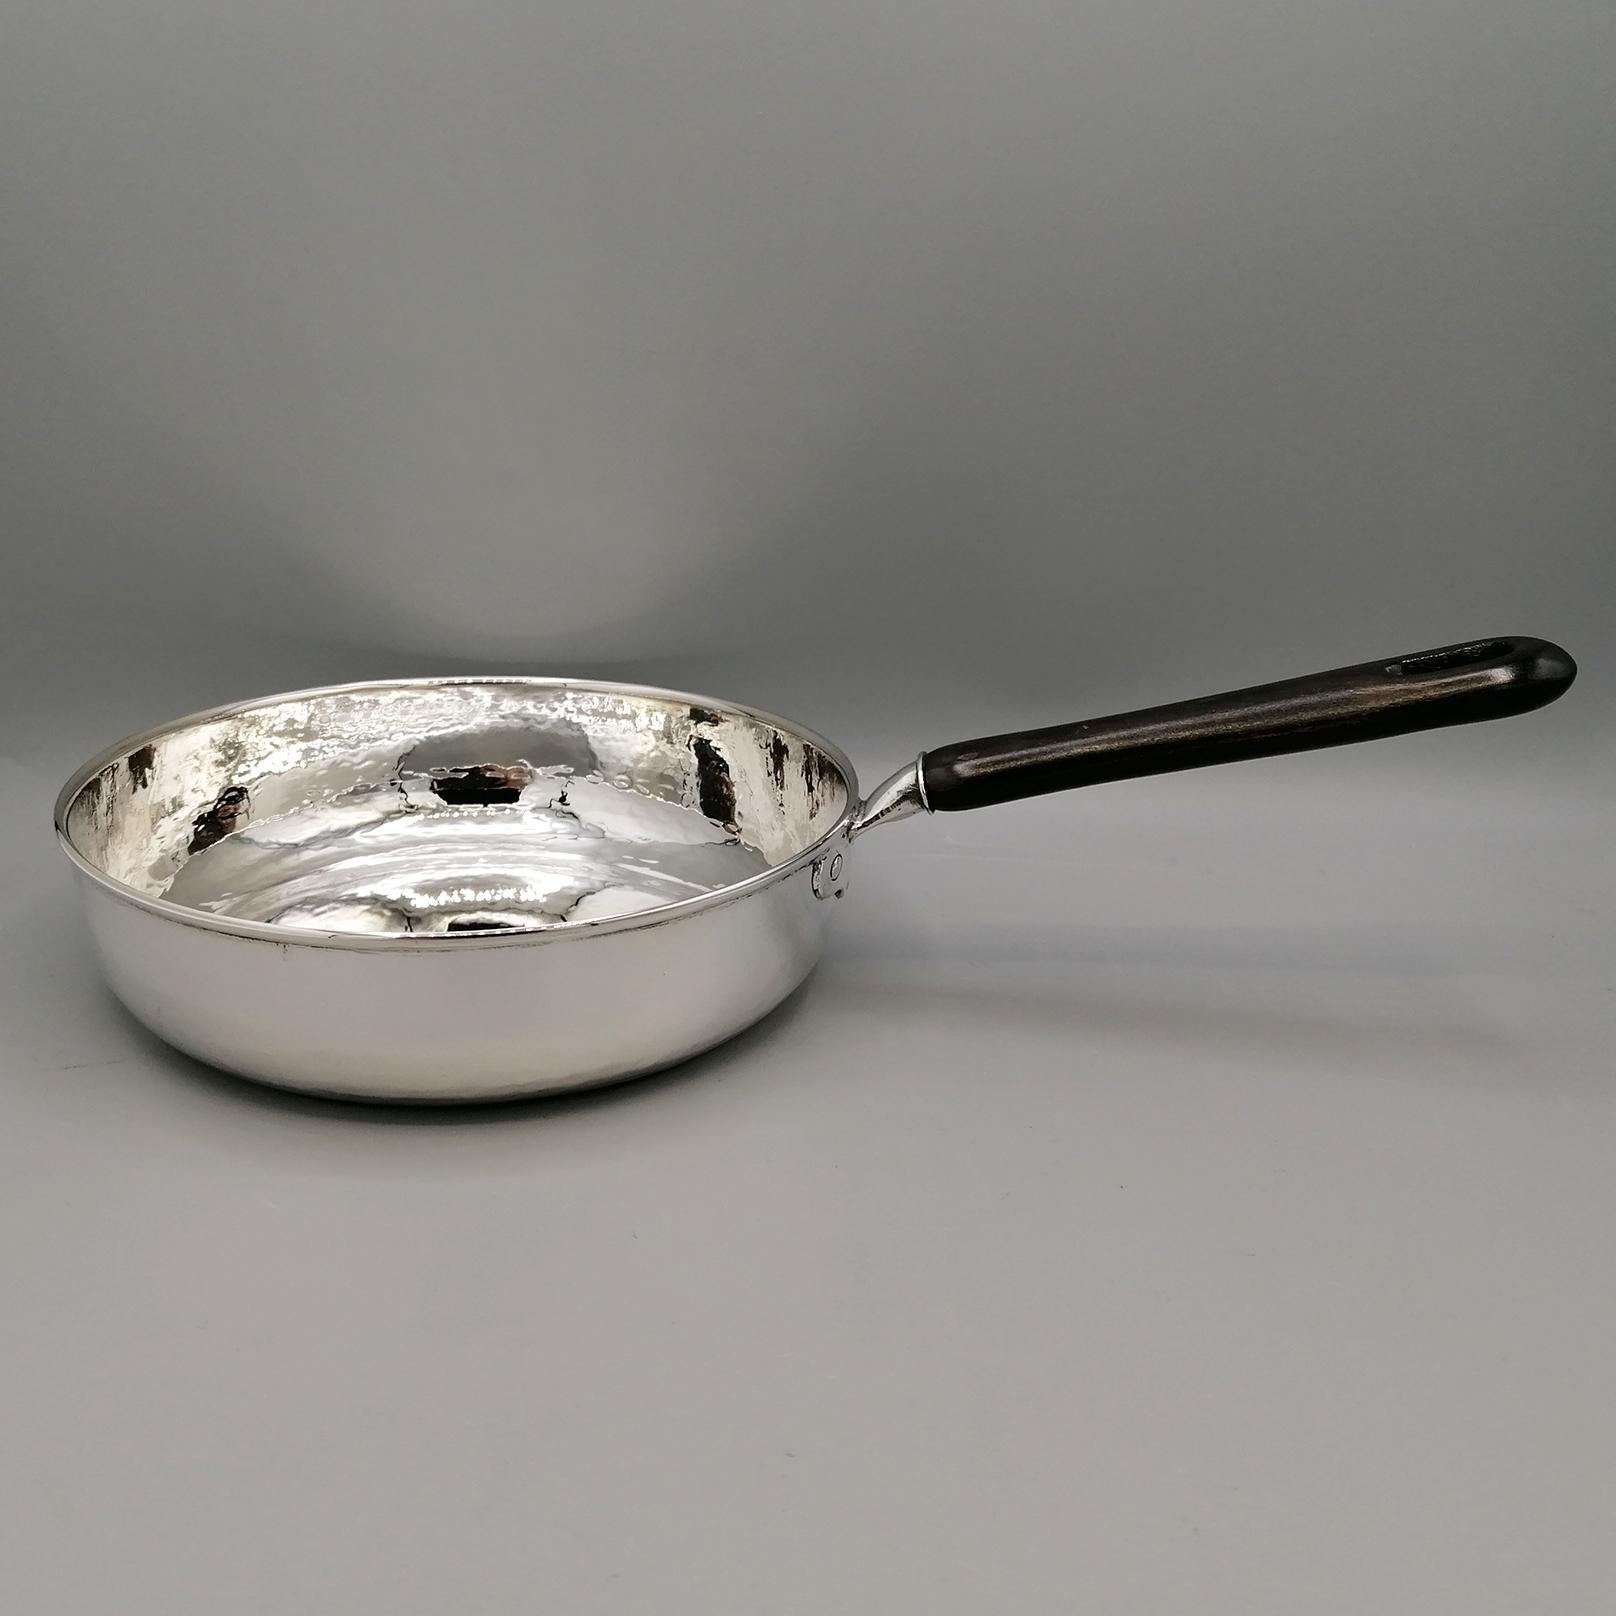 Unusual 800 silver ornament with pan-shaped wooden handle.
A flattened tube, also in silver, has been welded to the round and hammered part, where a wooden handle has been inserted
